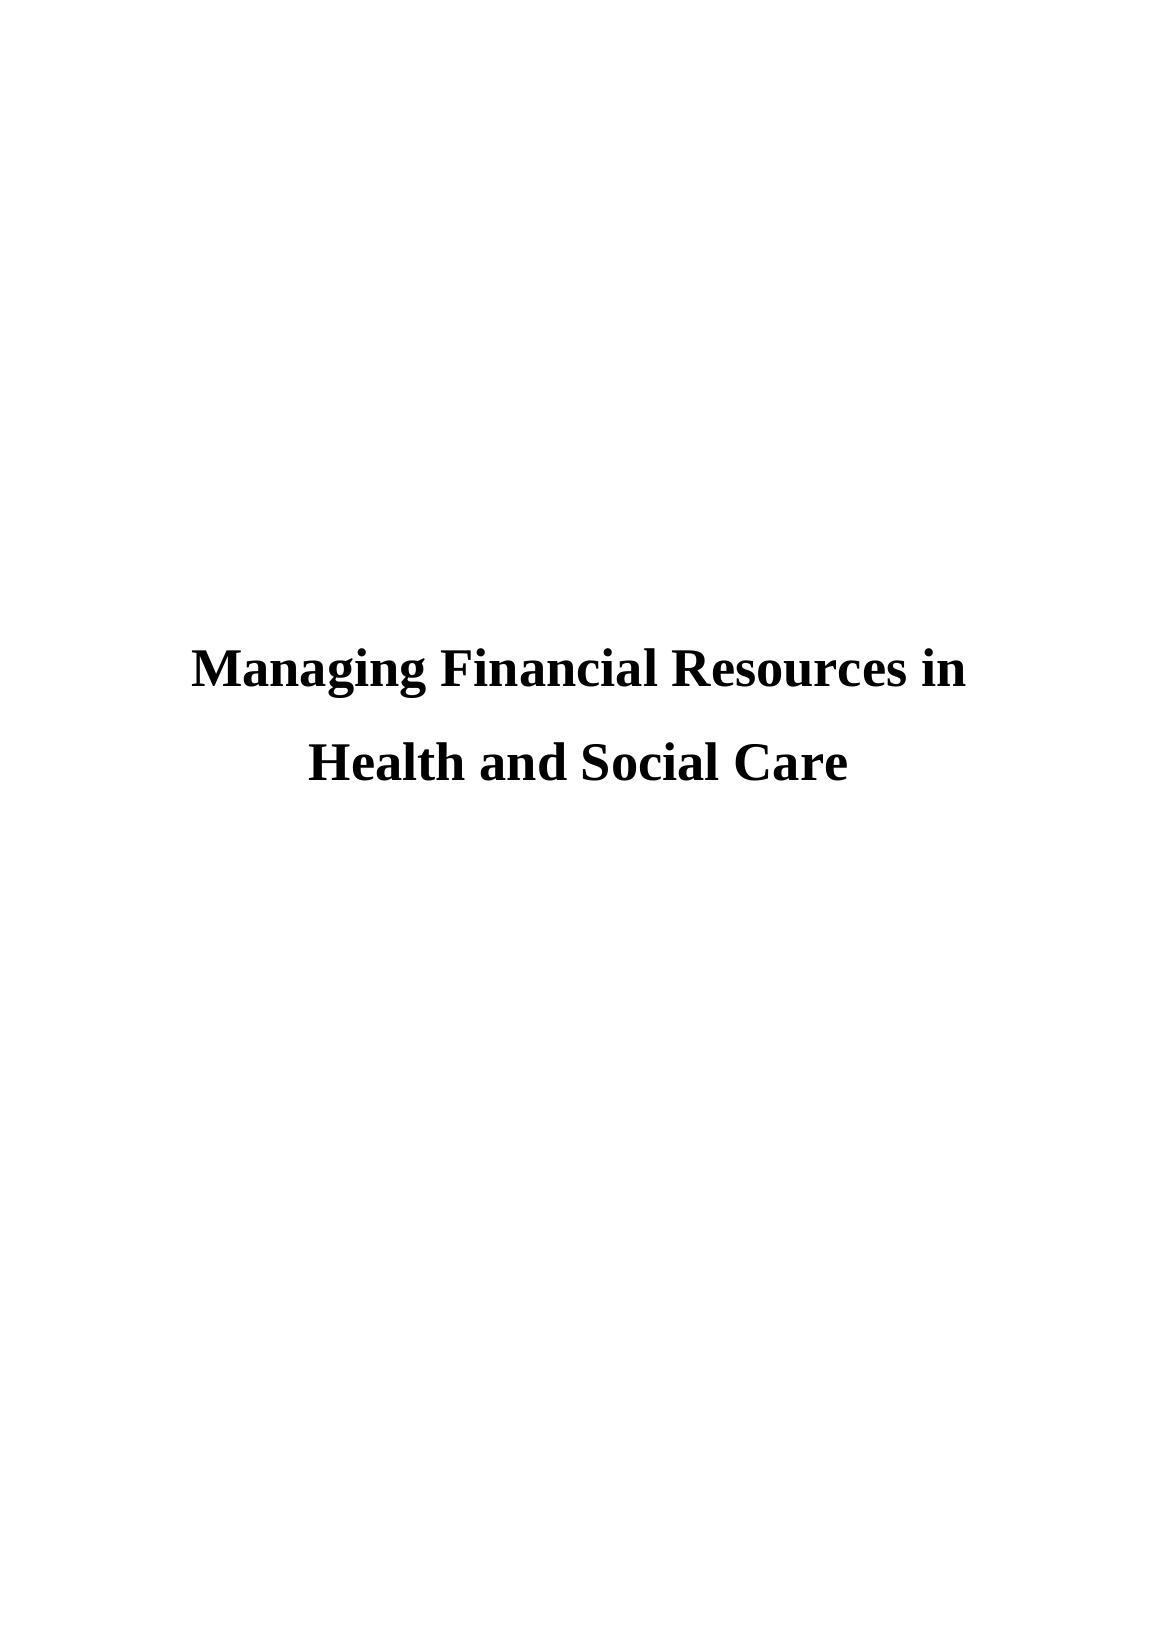 Managing Financial Resources in Health and Social Care (HSC) - Assignment_1